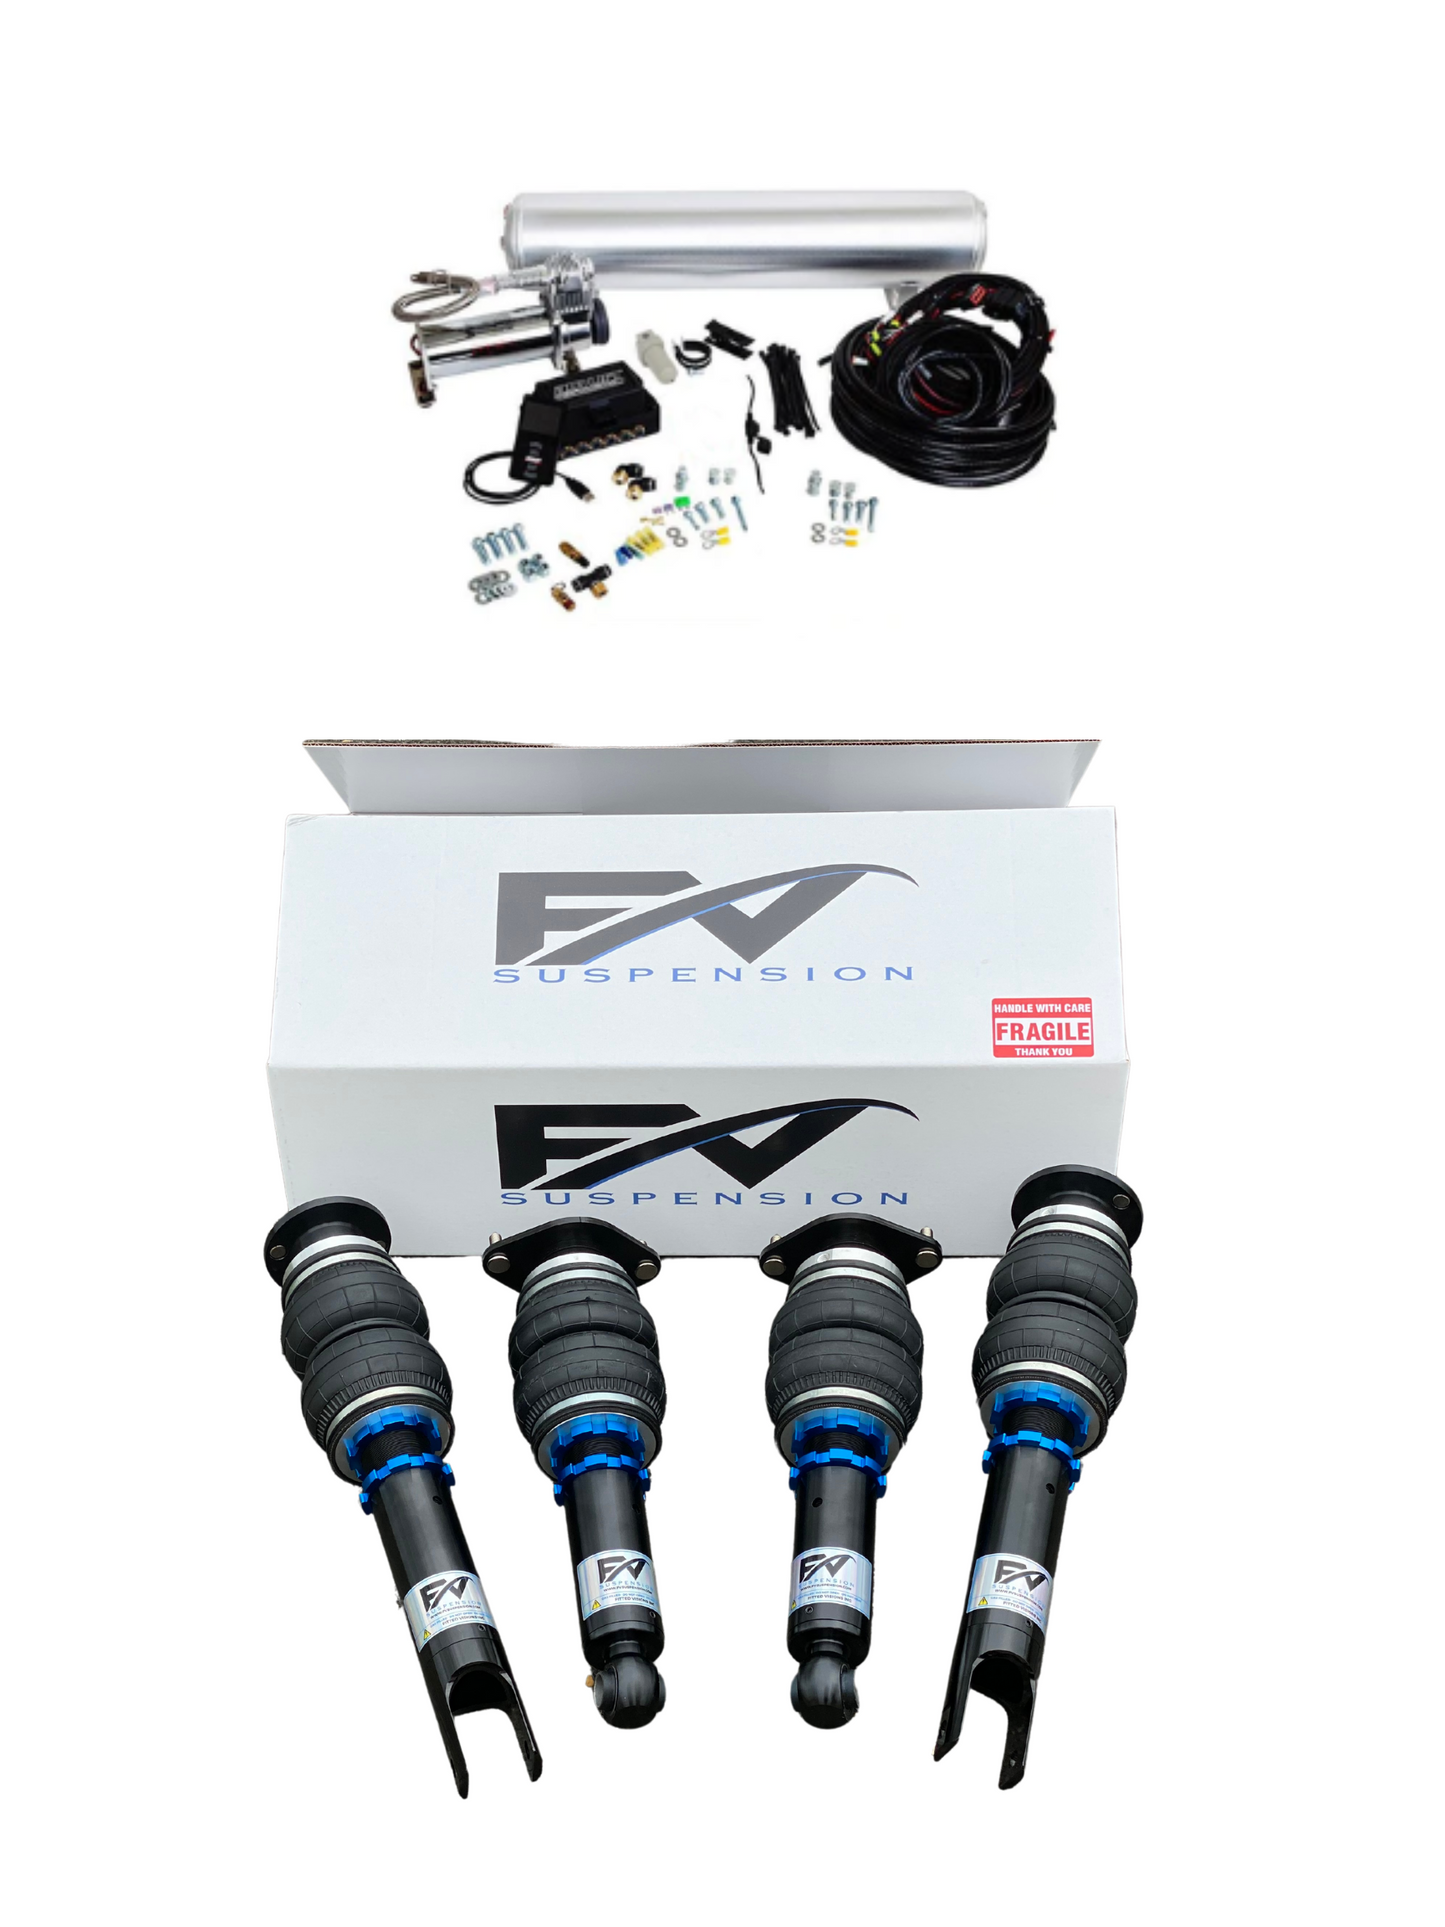 FV Suspension 3P Tier 2 Complete Air Ride kit for 85-88 TOYOTA CRESSIDA MX73